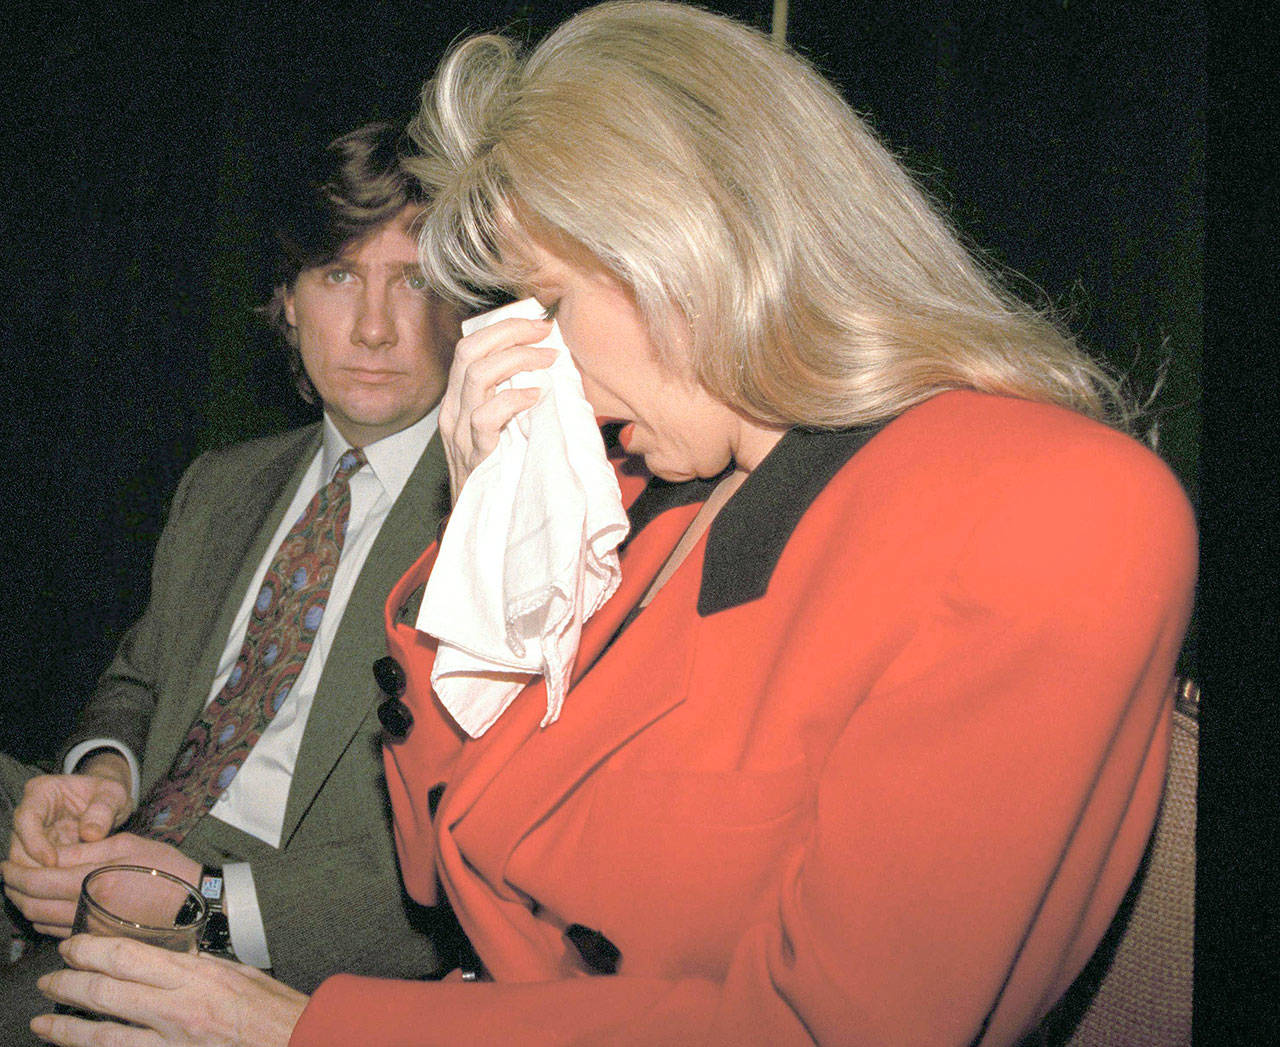 Gennifer Flowers, who said she had a 12-year affair with Democratic presidential hopeful Bill Clinton, dabs her eyes while listening to an audiotape of what she said was Clinton talking to her on the phone during a news conference in New York, on Jan. 27, 1992. Flowers told reporters, “The truth is I loved him. Now he tells me to deny it.” Her attorney Blake Hendrix is at left. Later on Jan. 27, Clinton, appearing with his wife, Hillary, on CBS’ “60 Minutes,” acknowledged “causing pain in my marriage.” (Associated Press)